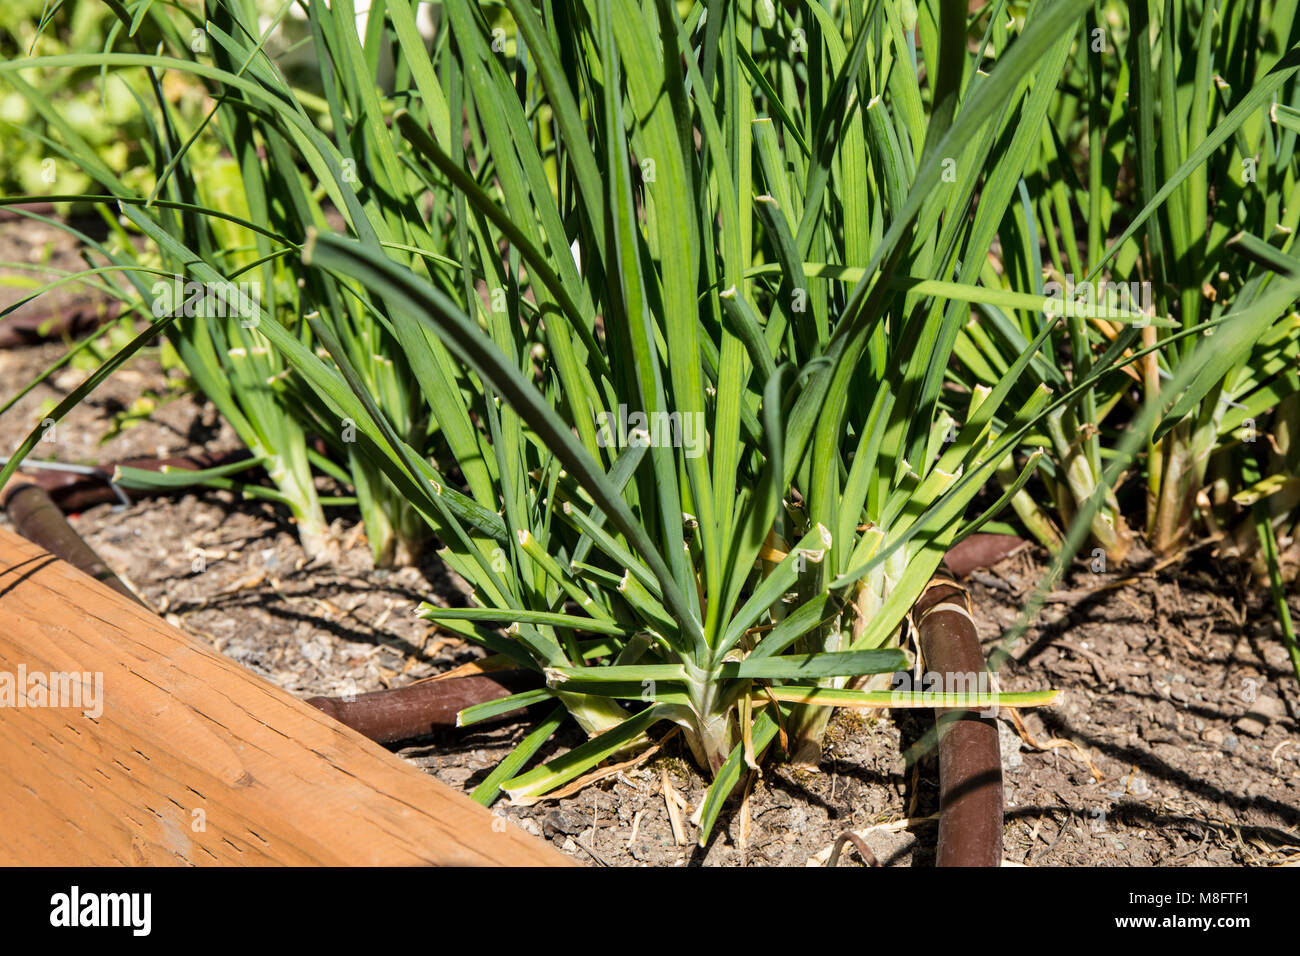 Garlic Chives growing.  Allium tuberosum is a perennial plant growing from a small, elongated bulb Stock Photo